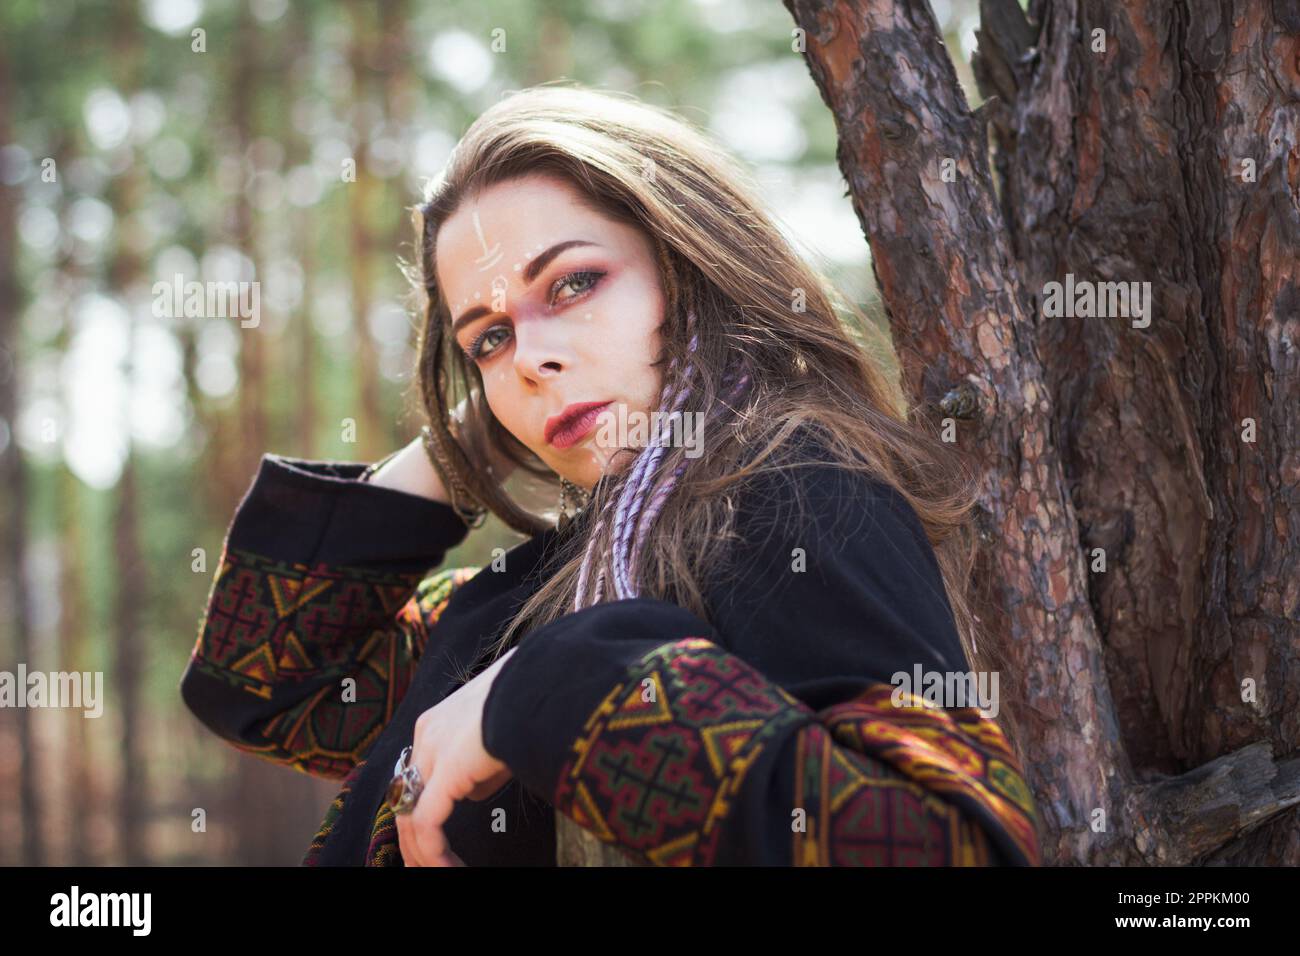 Close up mysterious lady with tribal patterns on face portrait picture Stock Photo